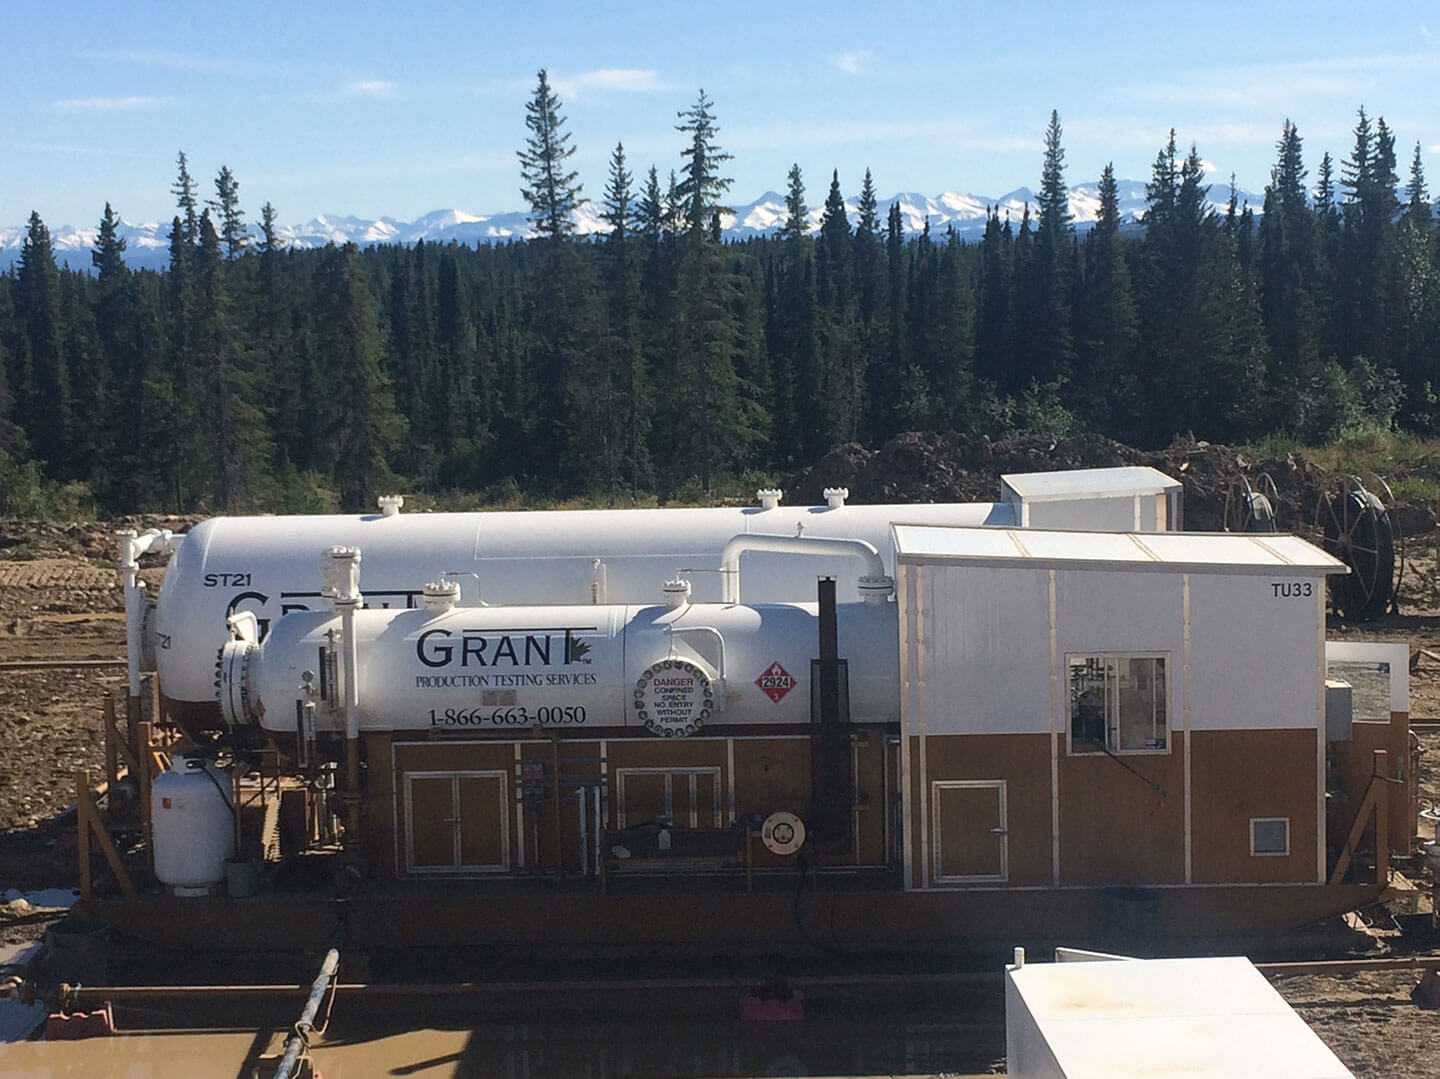 Canadian Well-Testing Services - Grant Production Testing Services